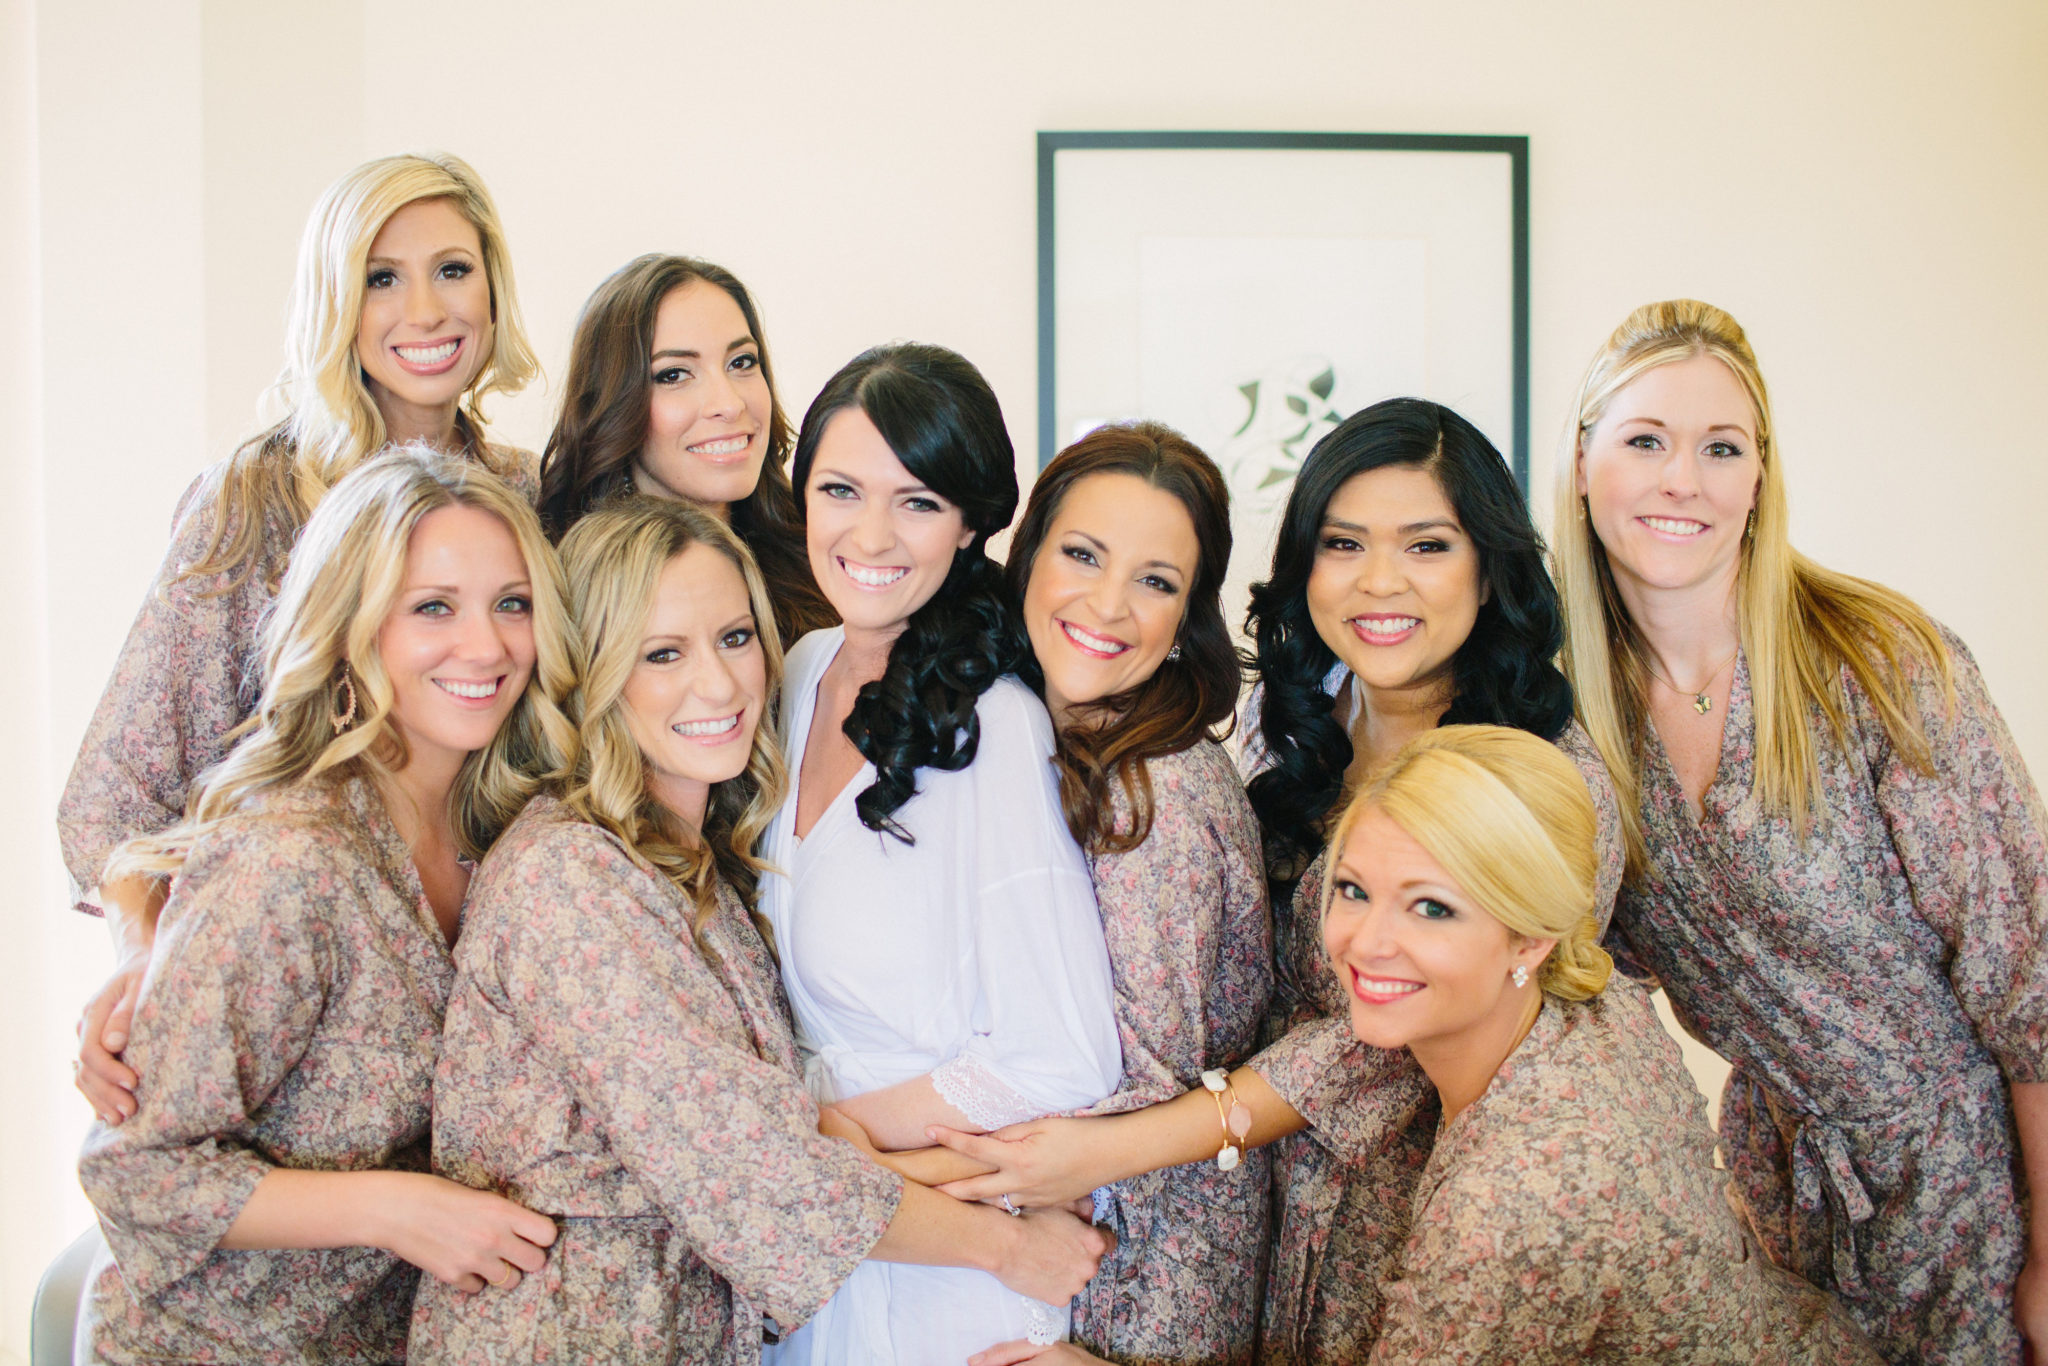 Aly and her bridesmaids in Joanna August gowns